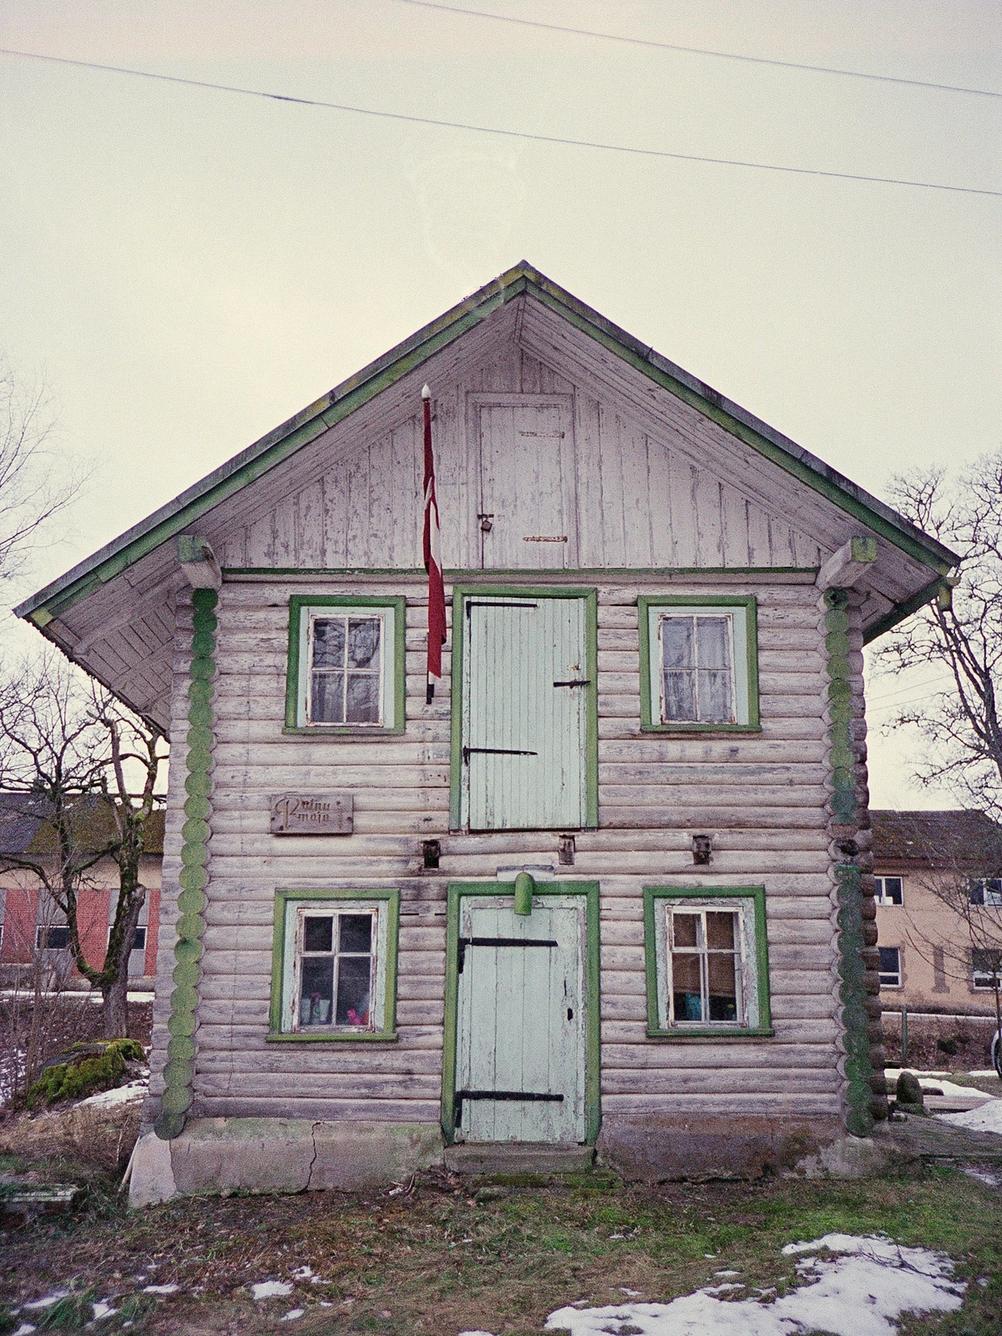 Photo of an interesting house.